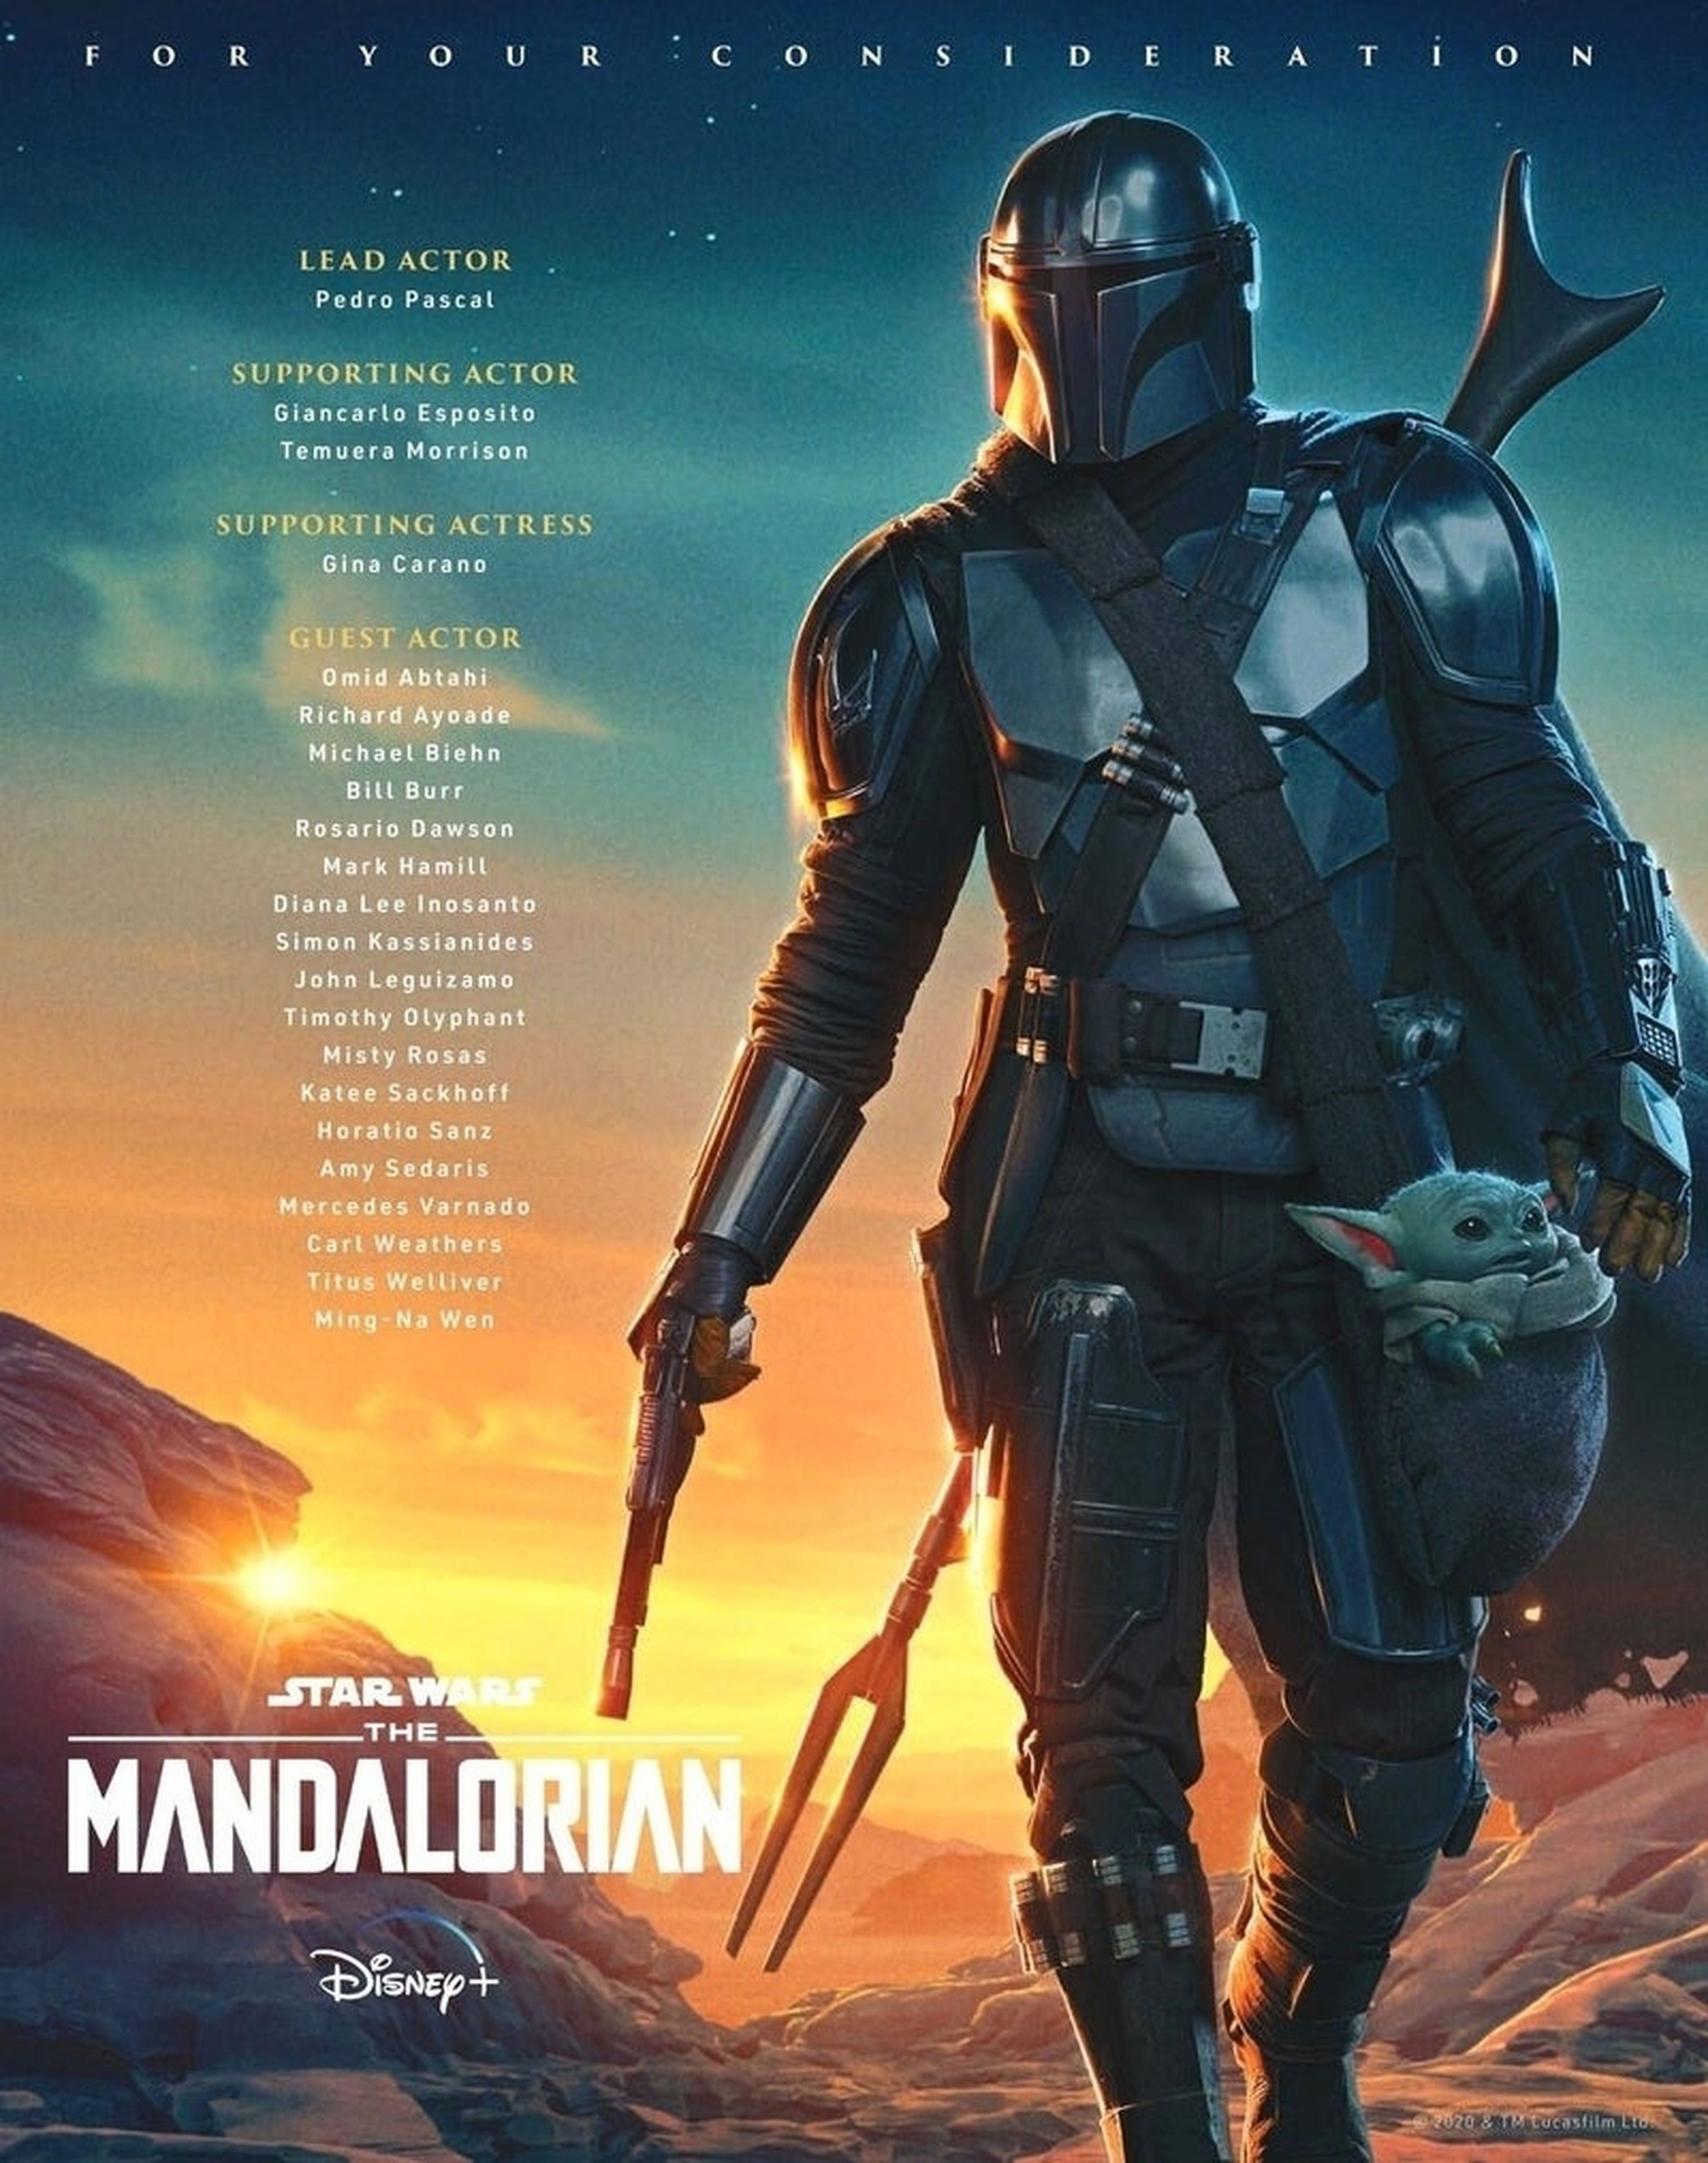 The Mandalorian - For Your Consideration - Emmy 2021